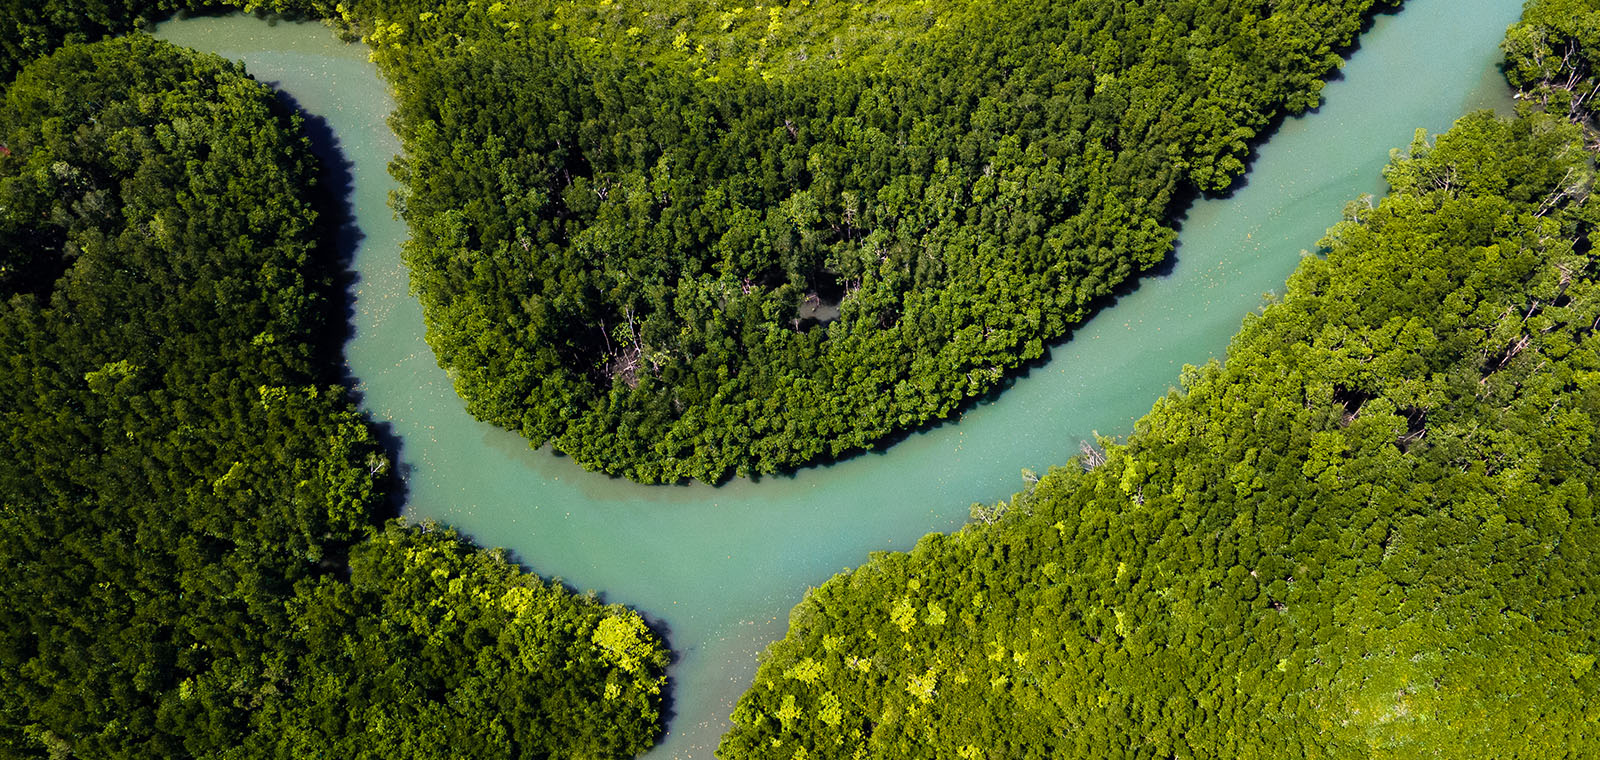 A river, viewed from above, winds its way through a forest.